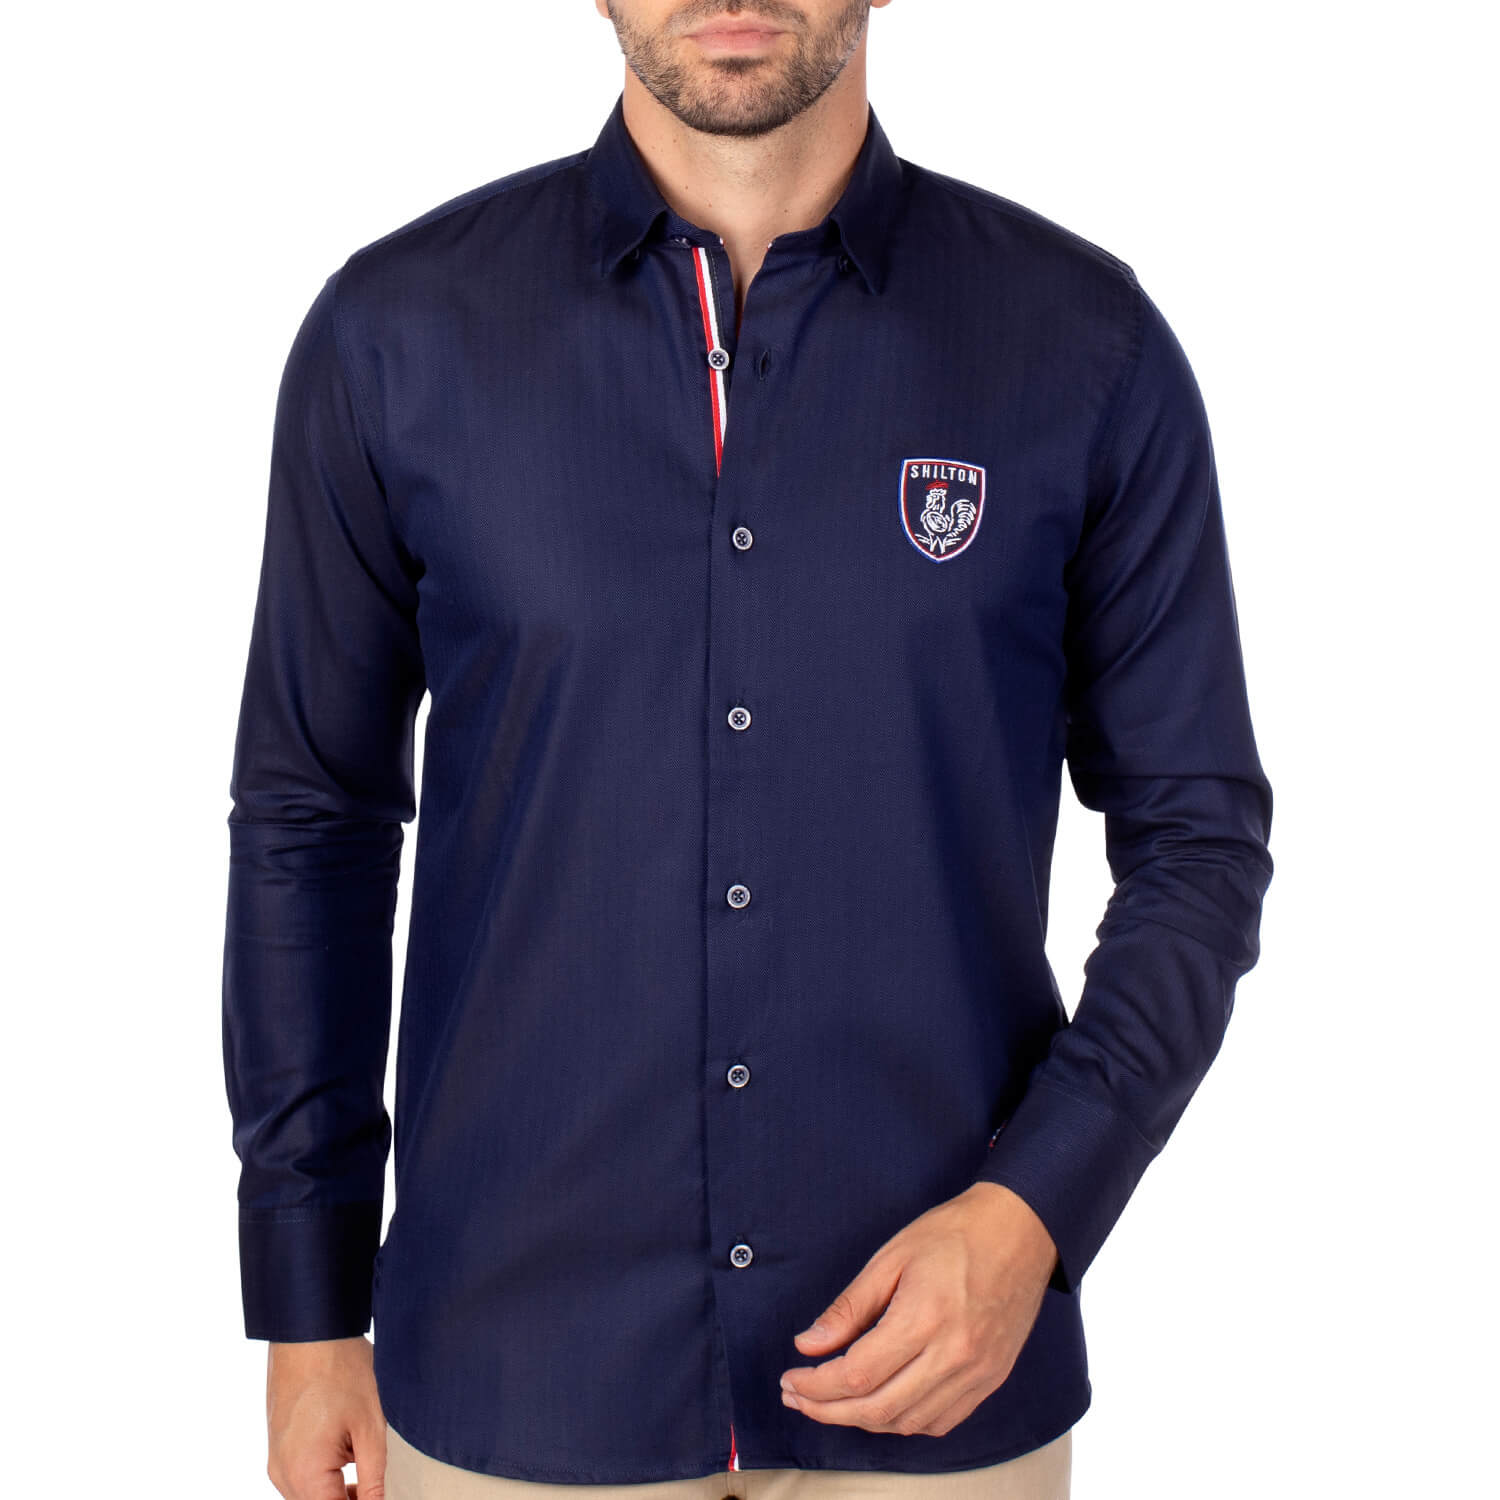 Chemise rugby france club